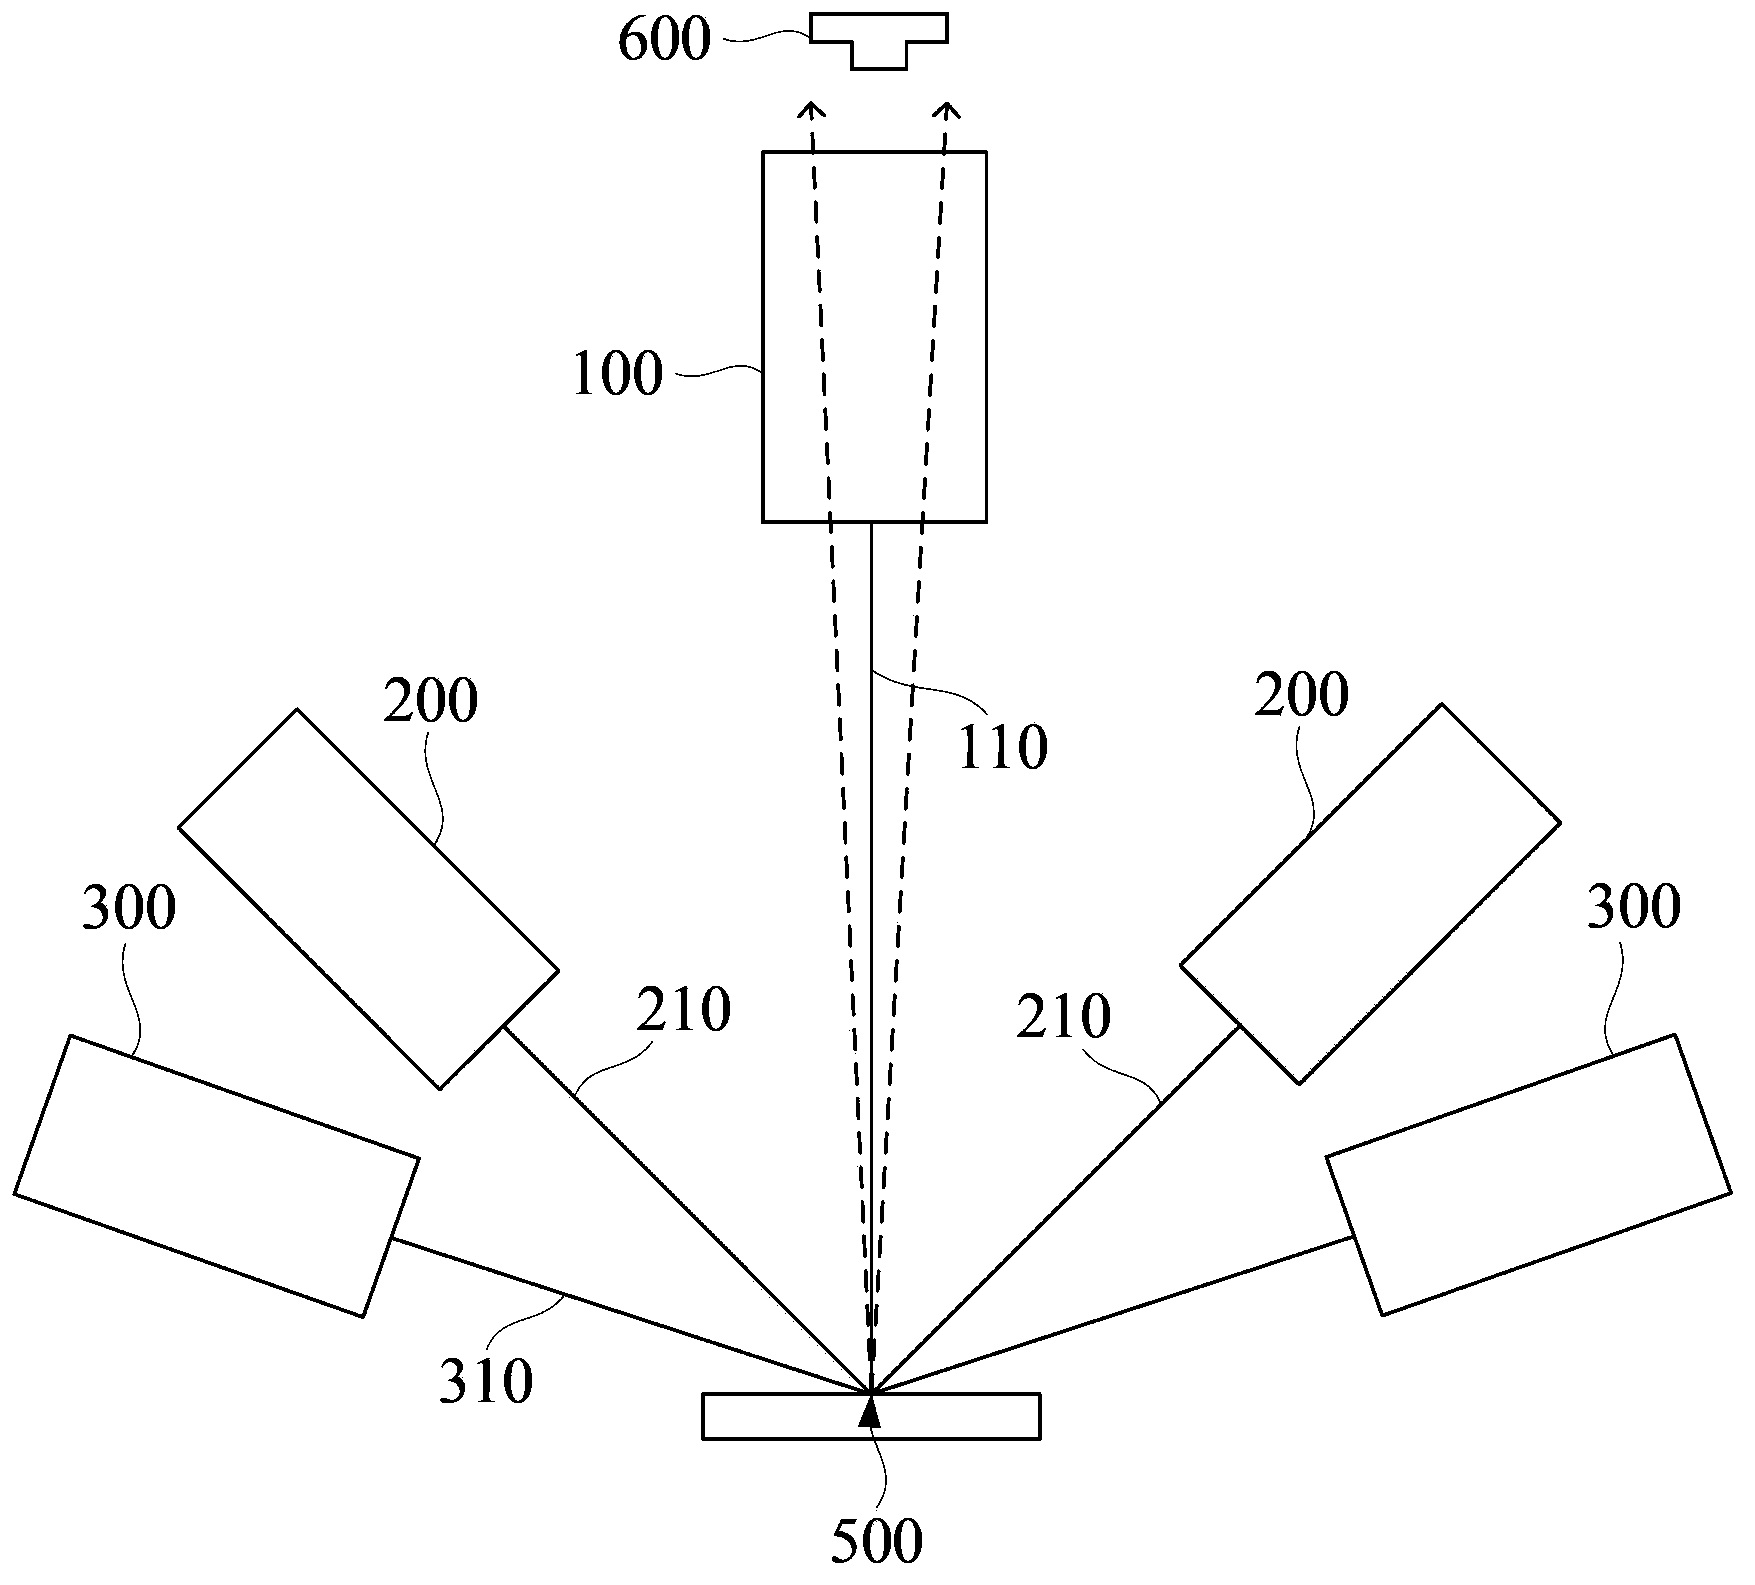 Illumination system for optical detection, detection system and method using the same